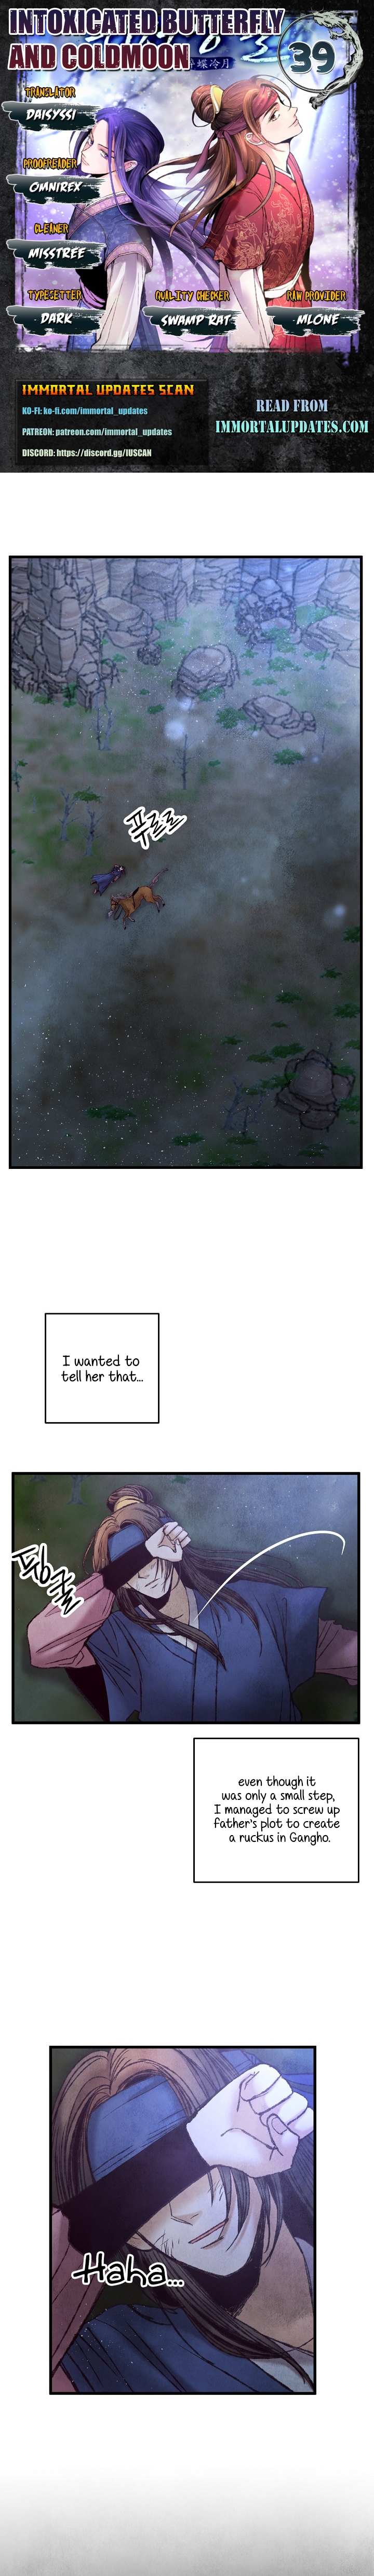 Intoxicated Butterfly And Cold Moon - Page 1